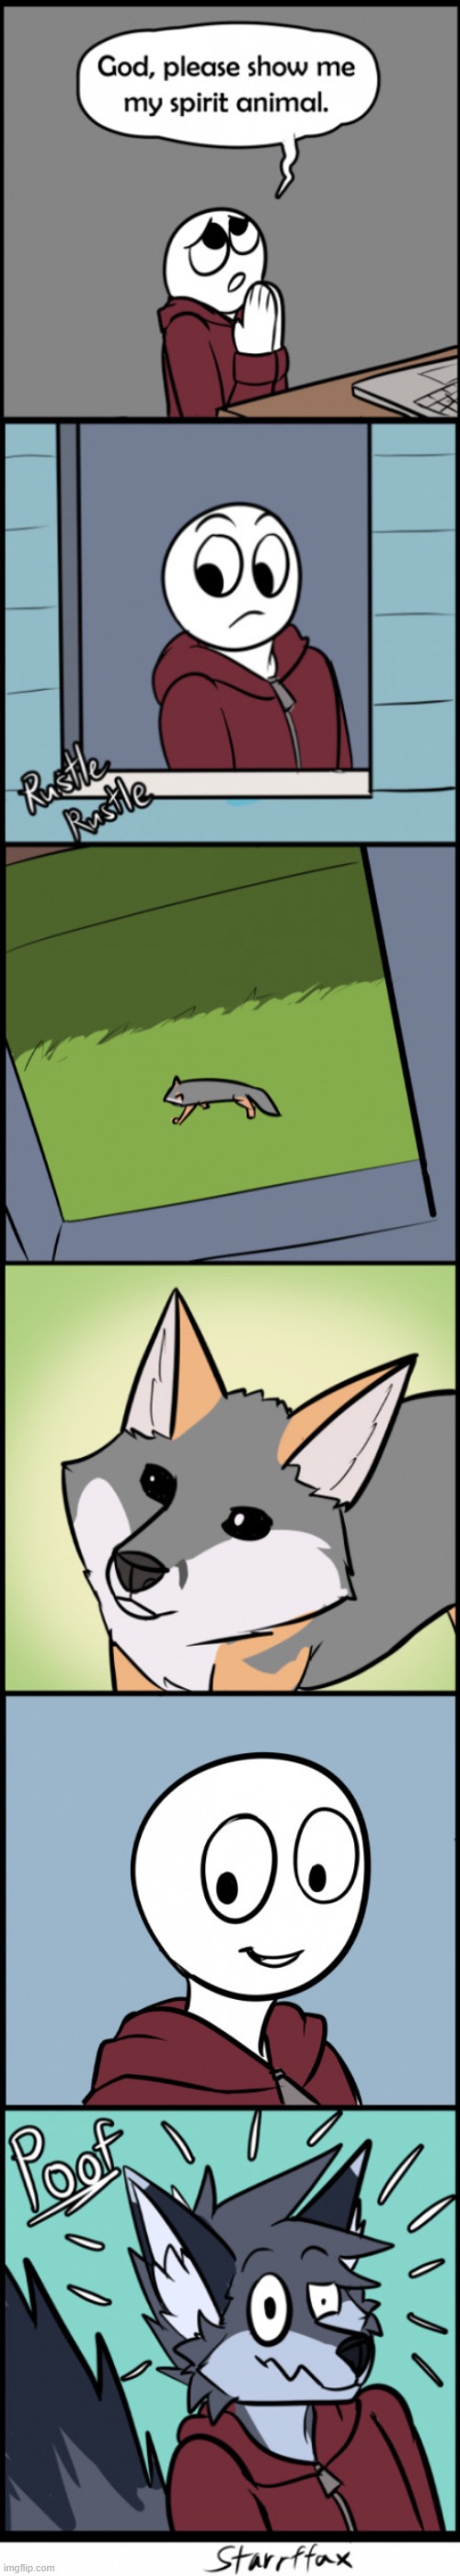 *Poof* (By Starrffax) | image tagged in furry,comics/cartoons,funny,memes | made w/ Imgflip meme maker